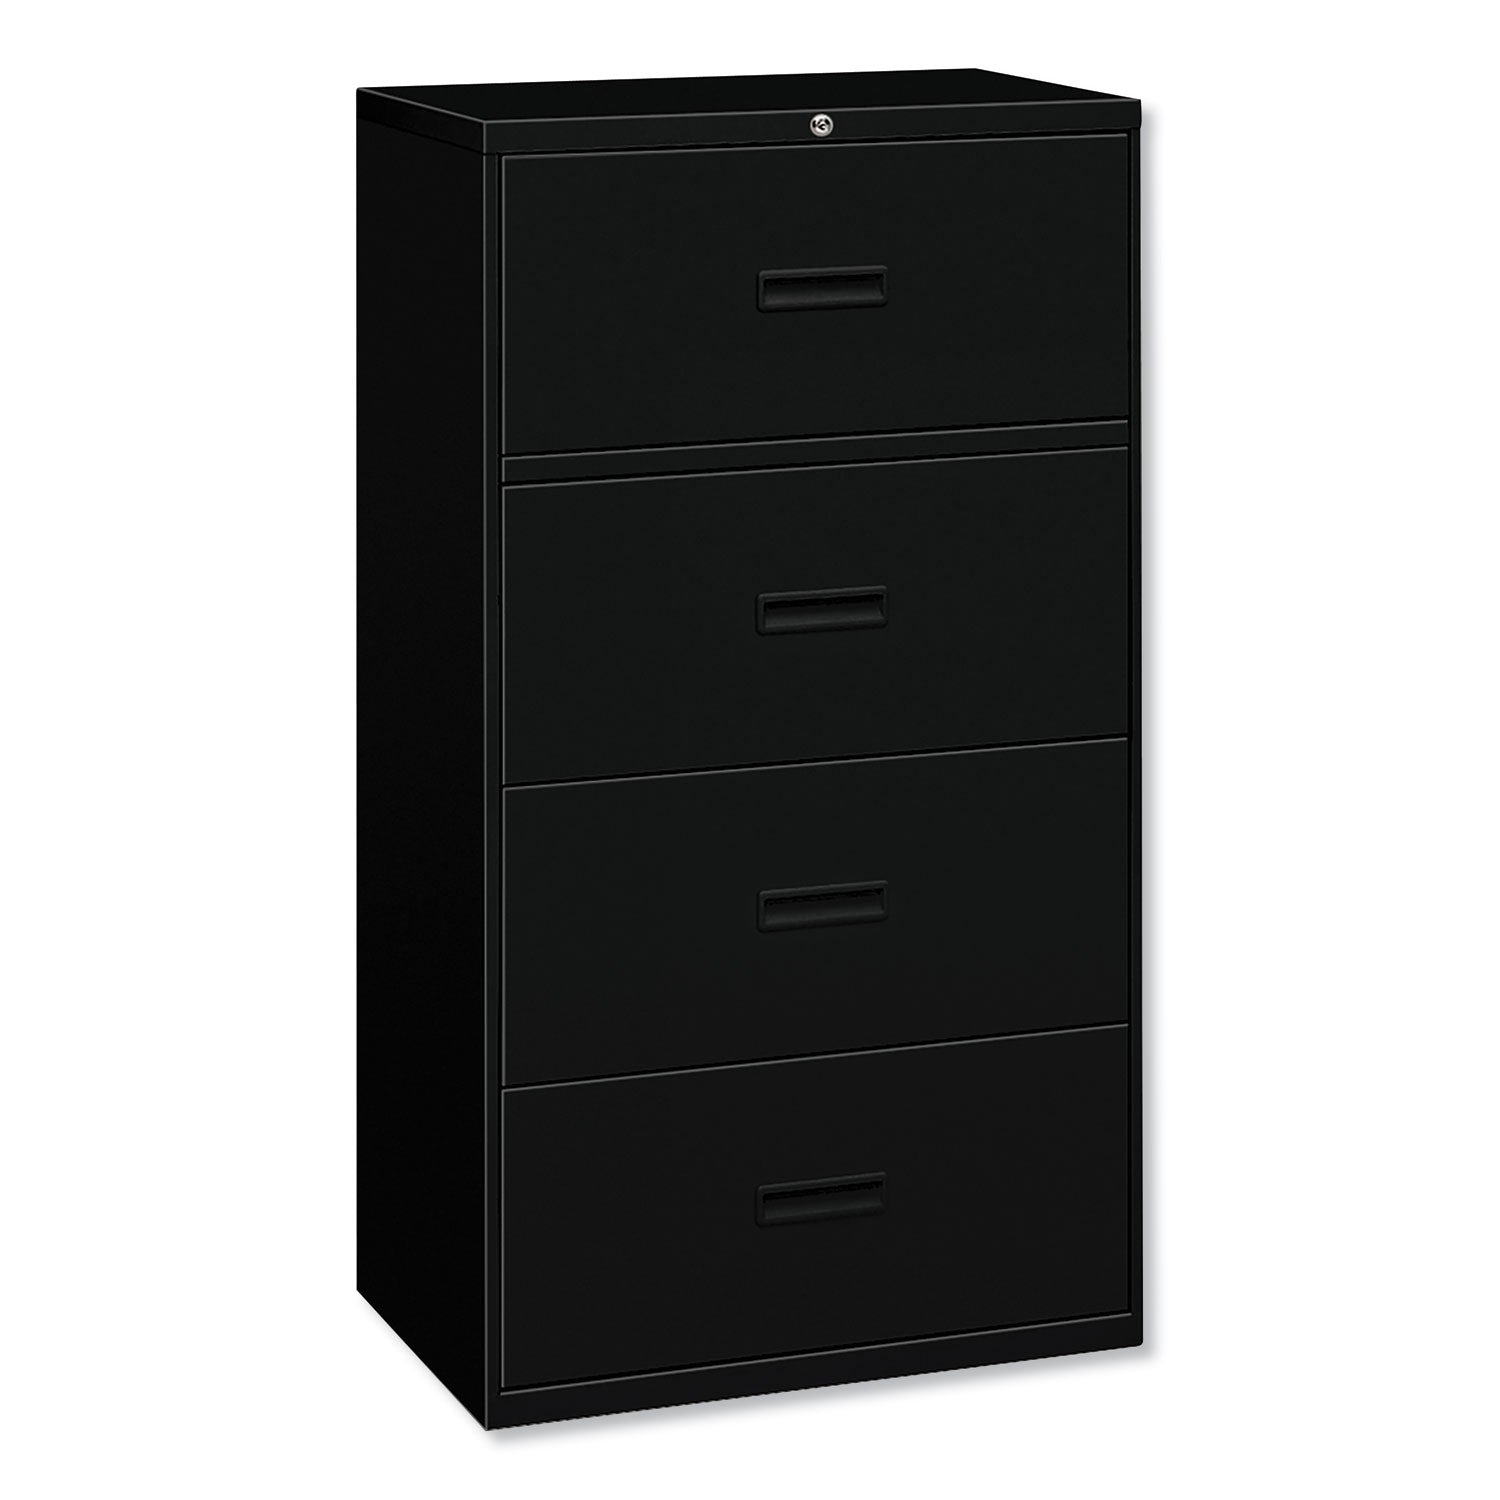 400 Series Lateral File, 4 Legal/Letter-Size File Drawers, Black, 36" x 18" x 52.5 - 